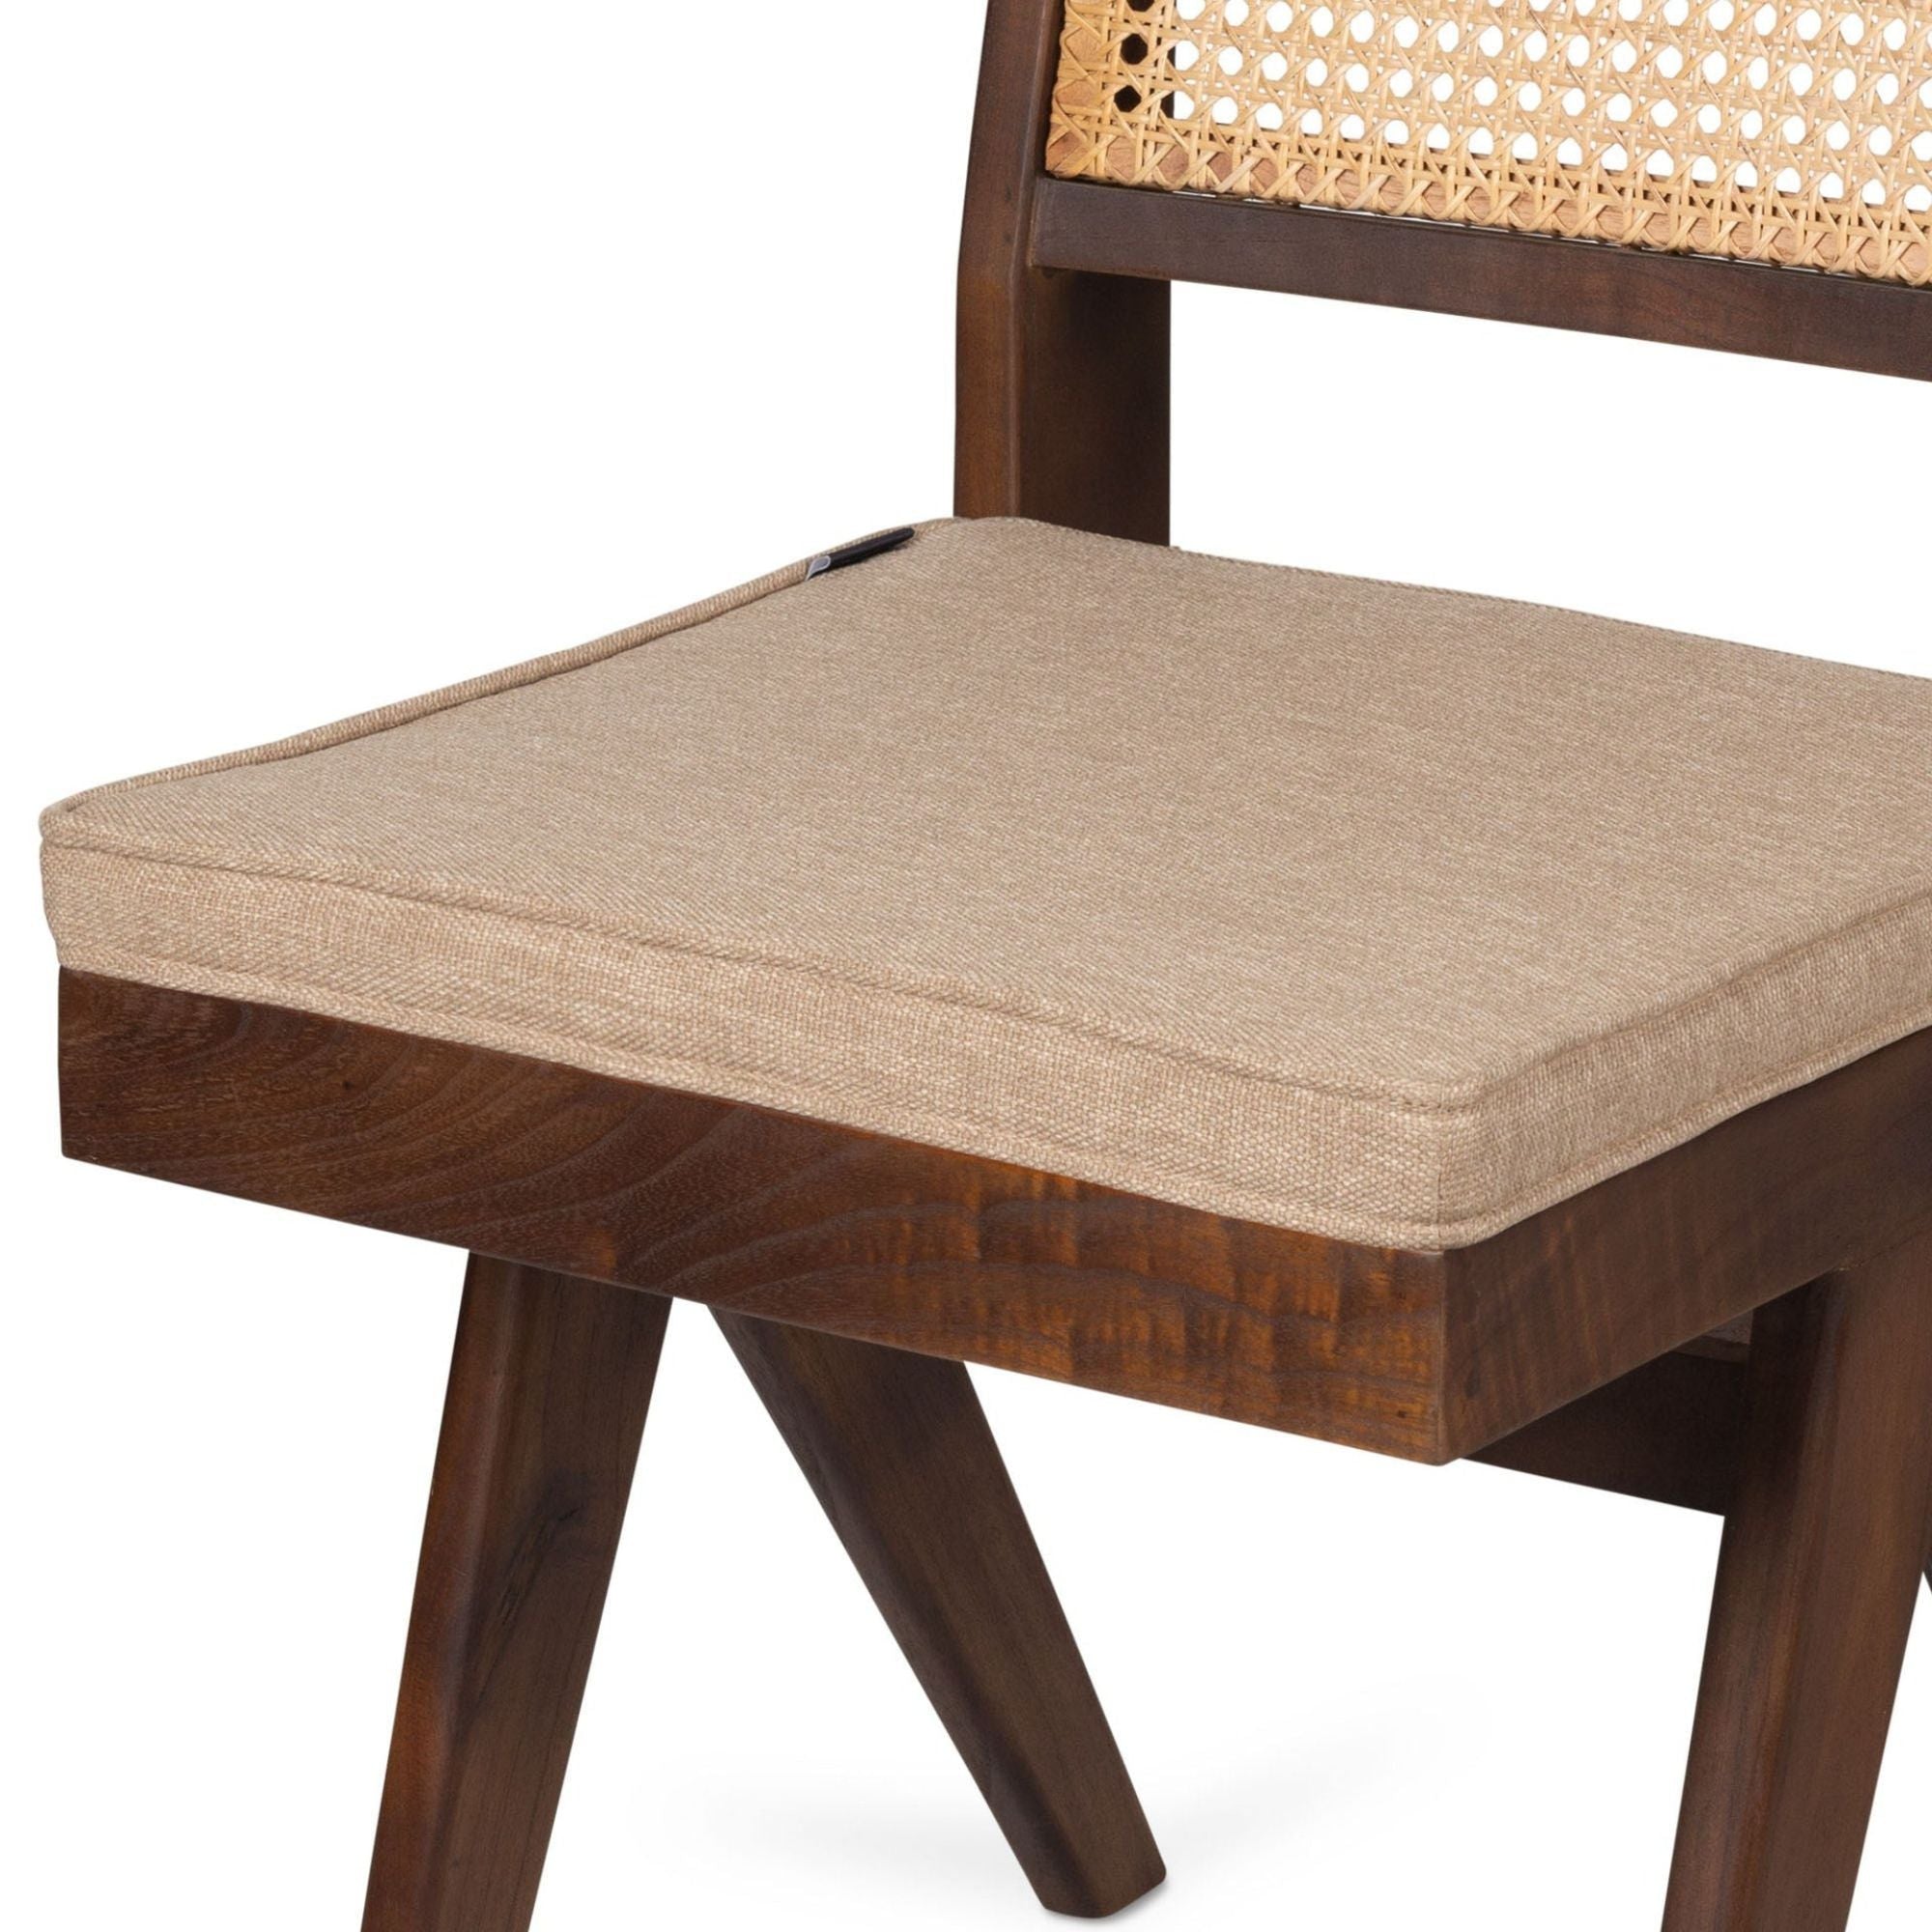 Cushion for Dining Chair - THAT COOL LIVING